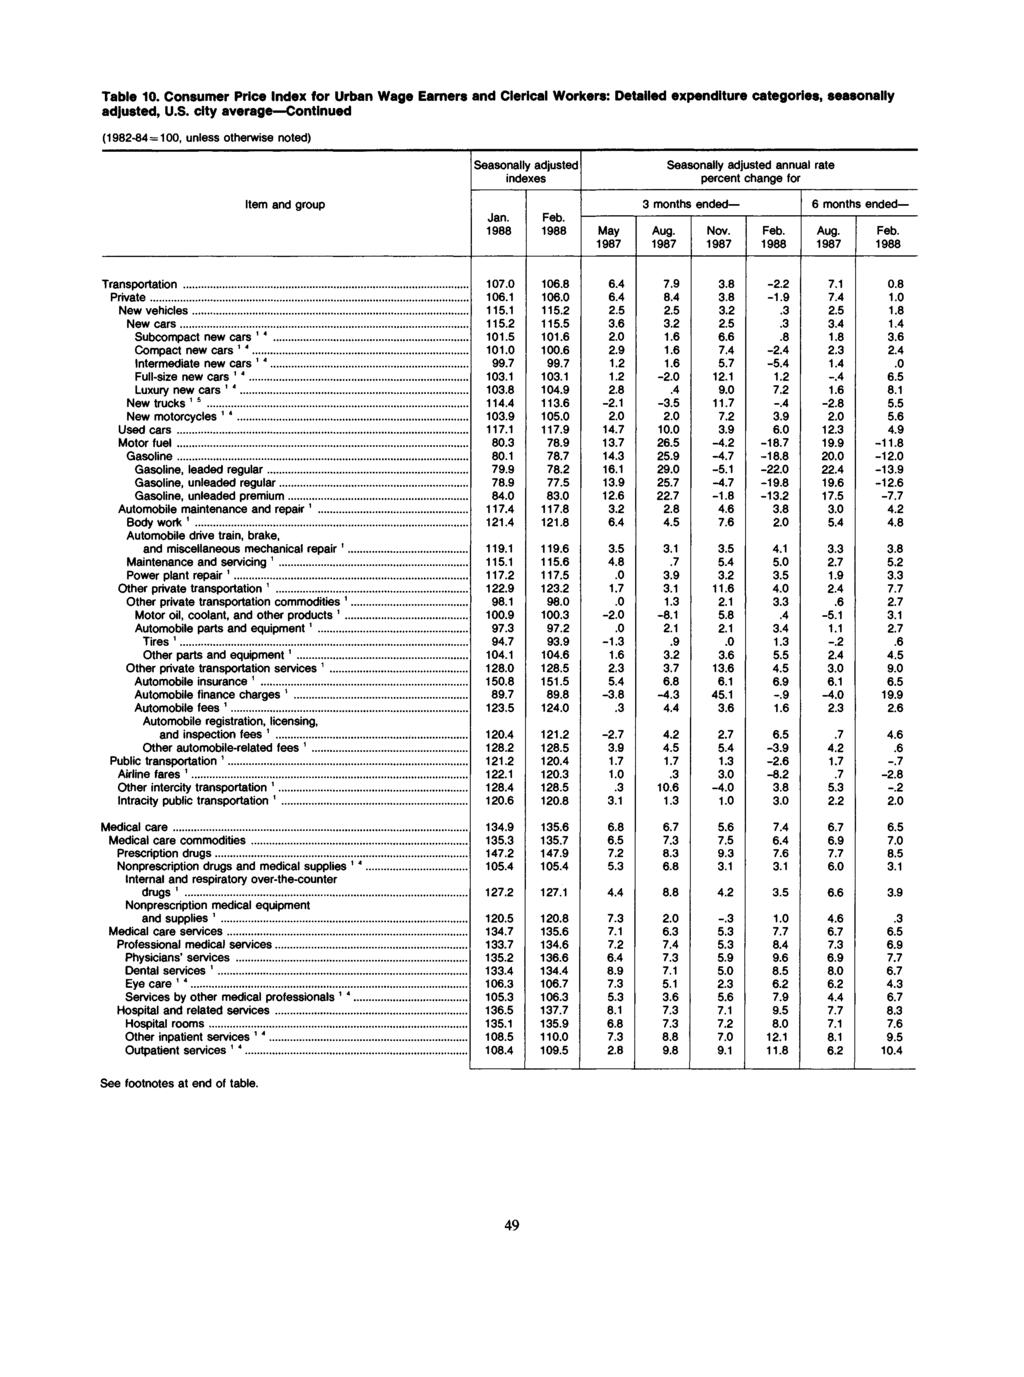 Table 10. Consumer Price for Urban Wage Earners and Clerical Workers: Detailed expenditure categories, seasonally adjusted, U.S.